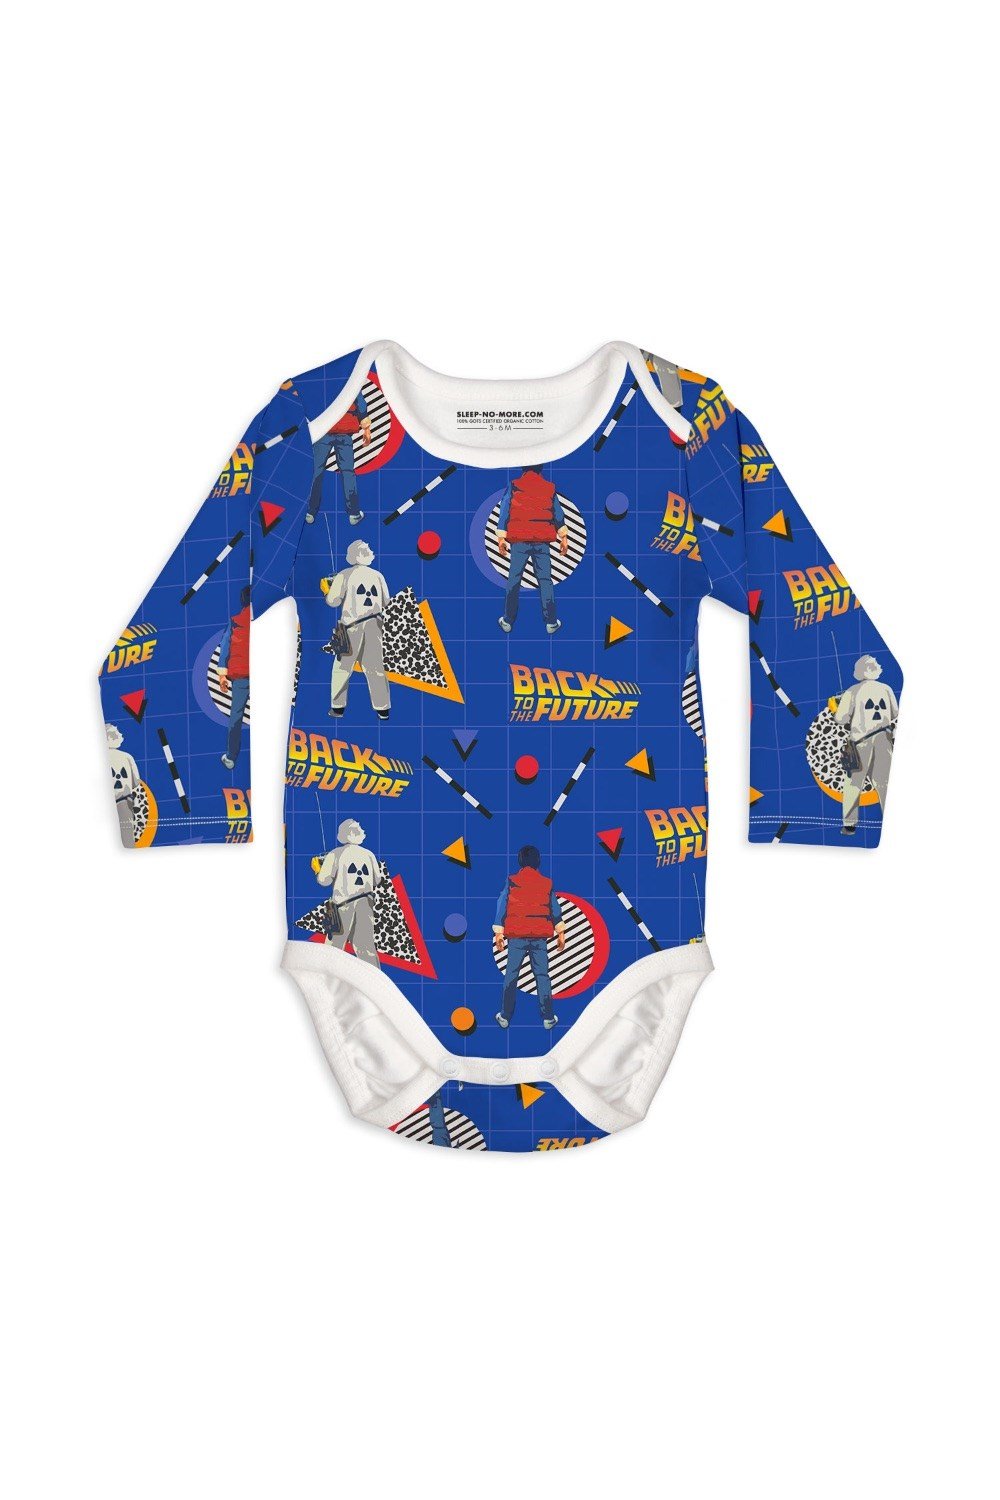 Back To The Future 01 Long Sleeved Baby Bodysuit -